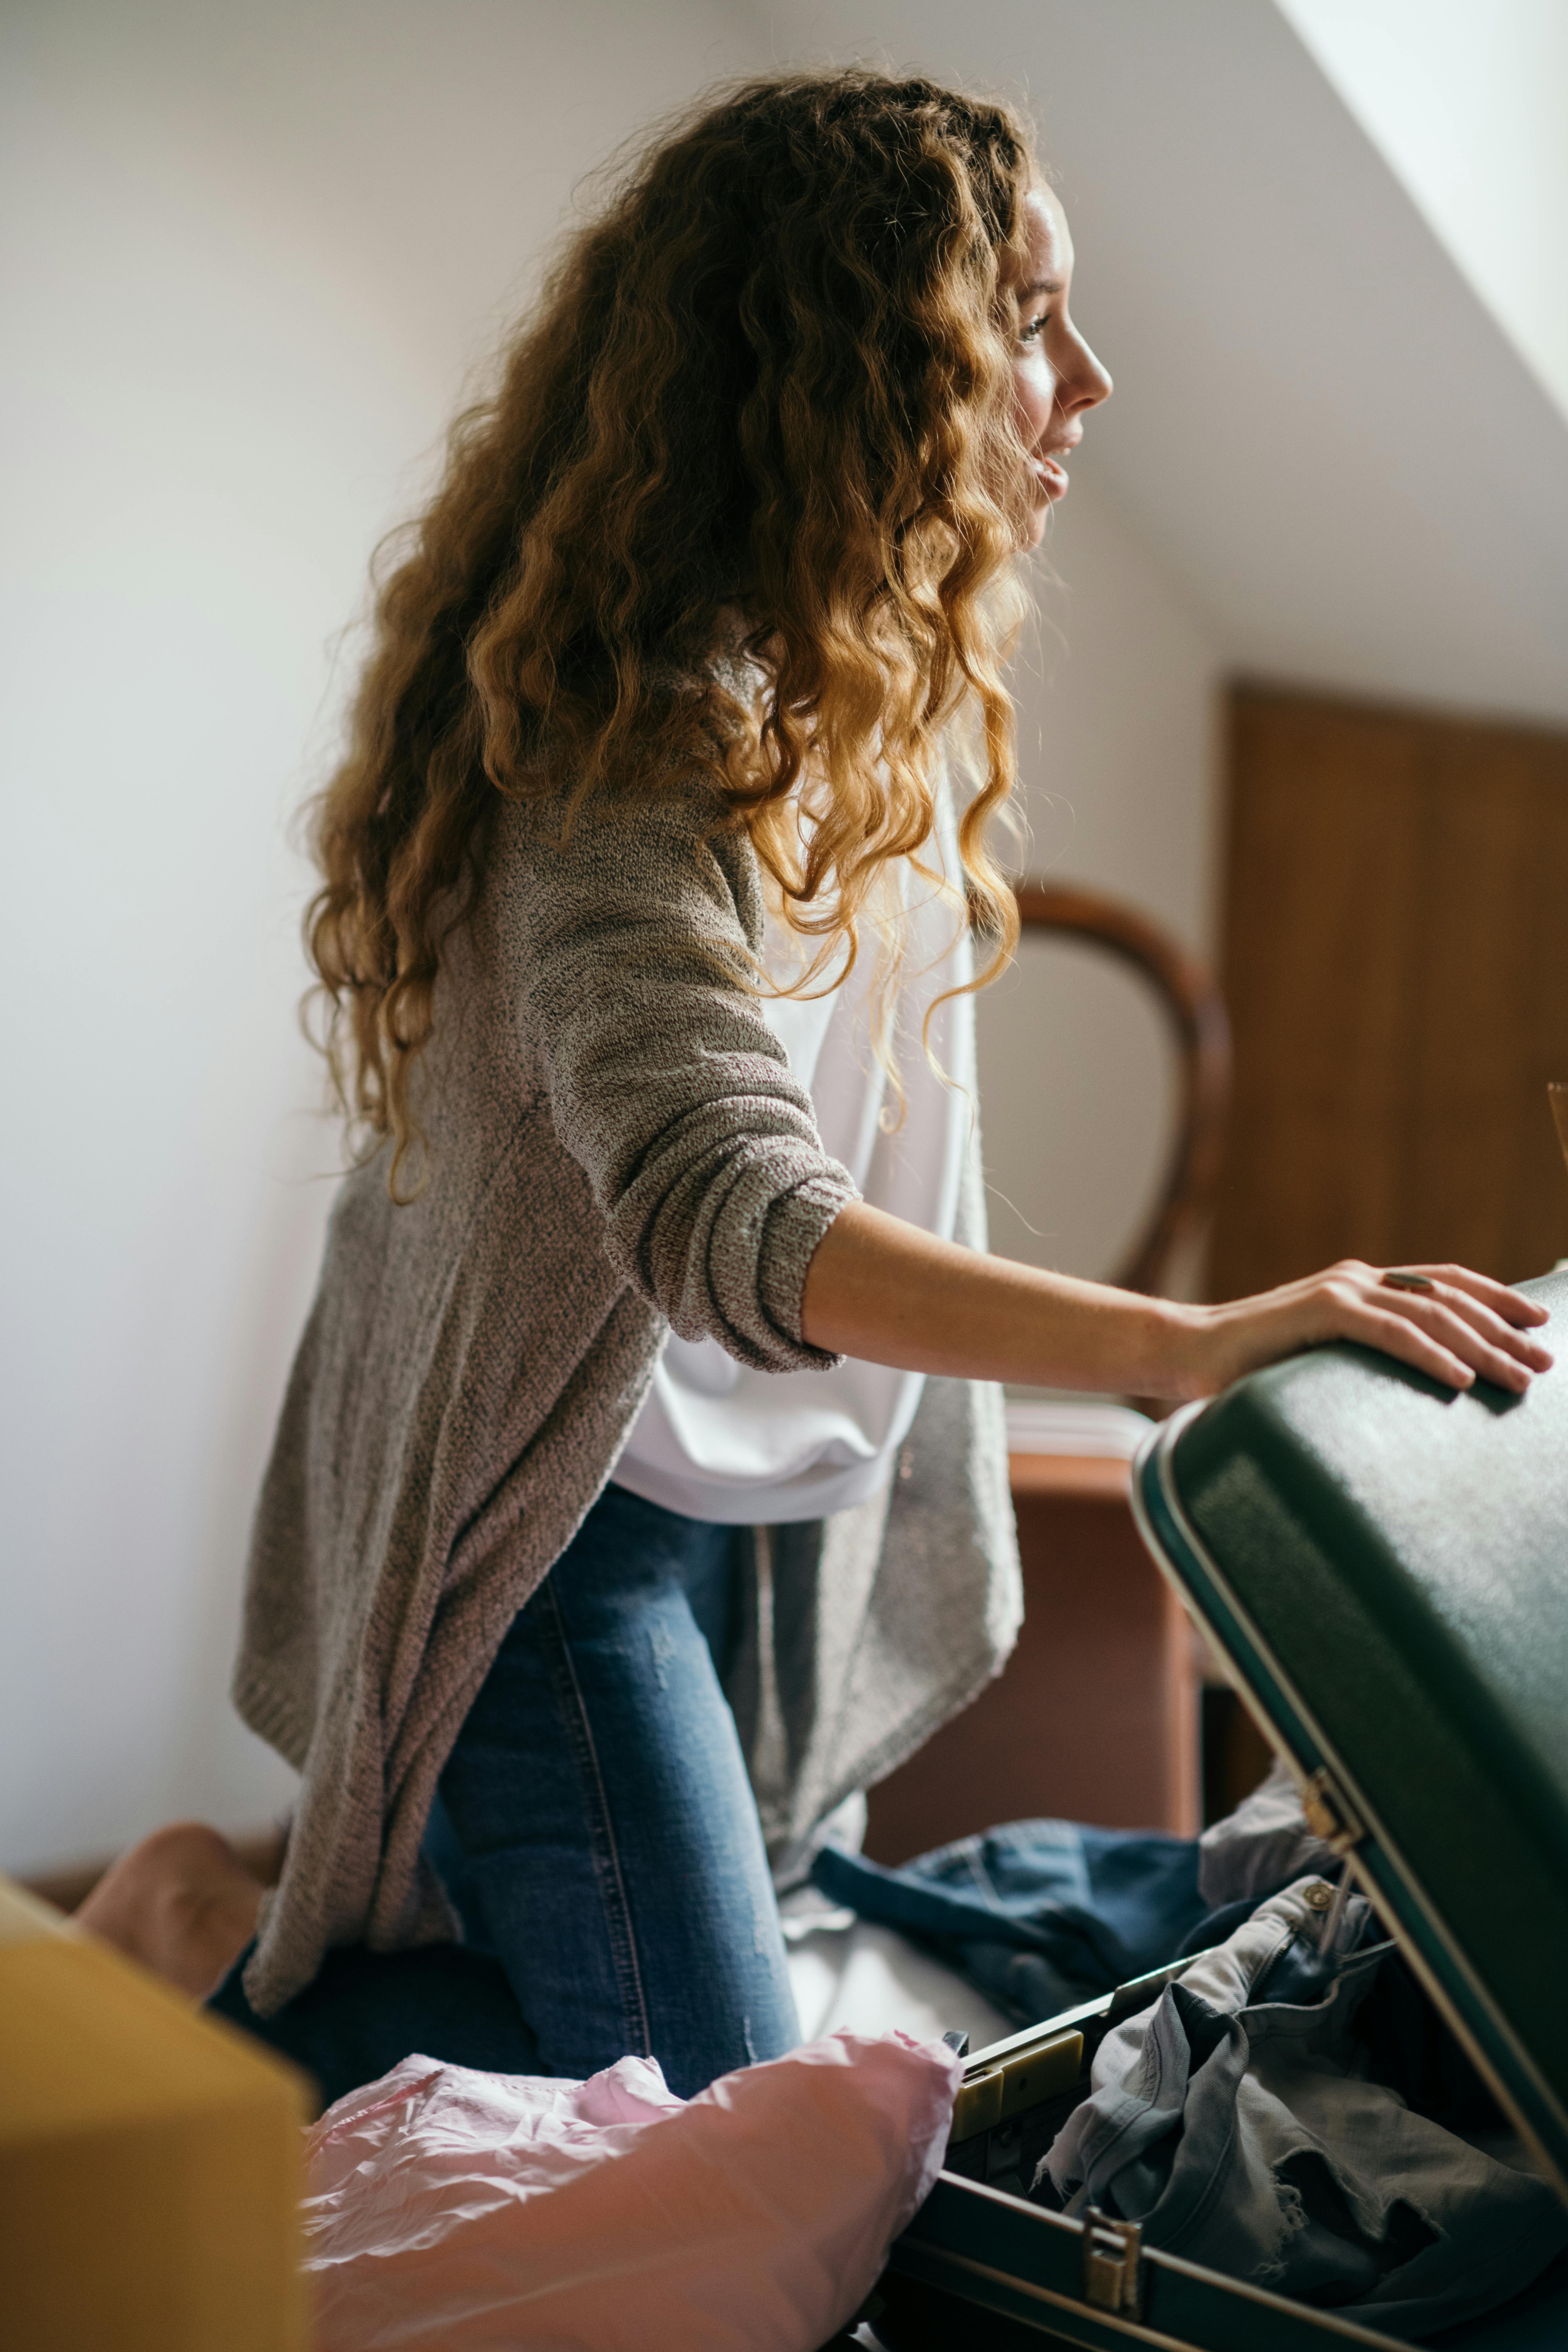 Crop woman packing suitcase on bed - a Royalty Free Stock Photo